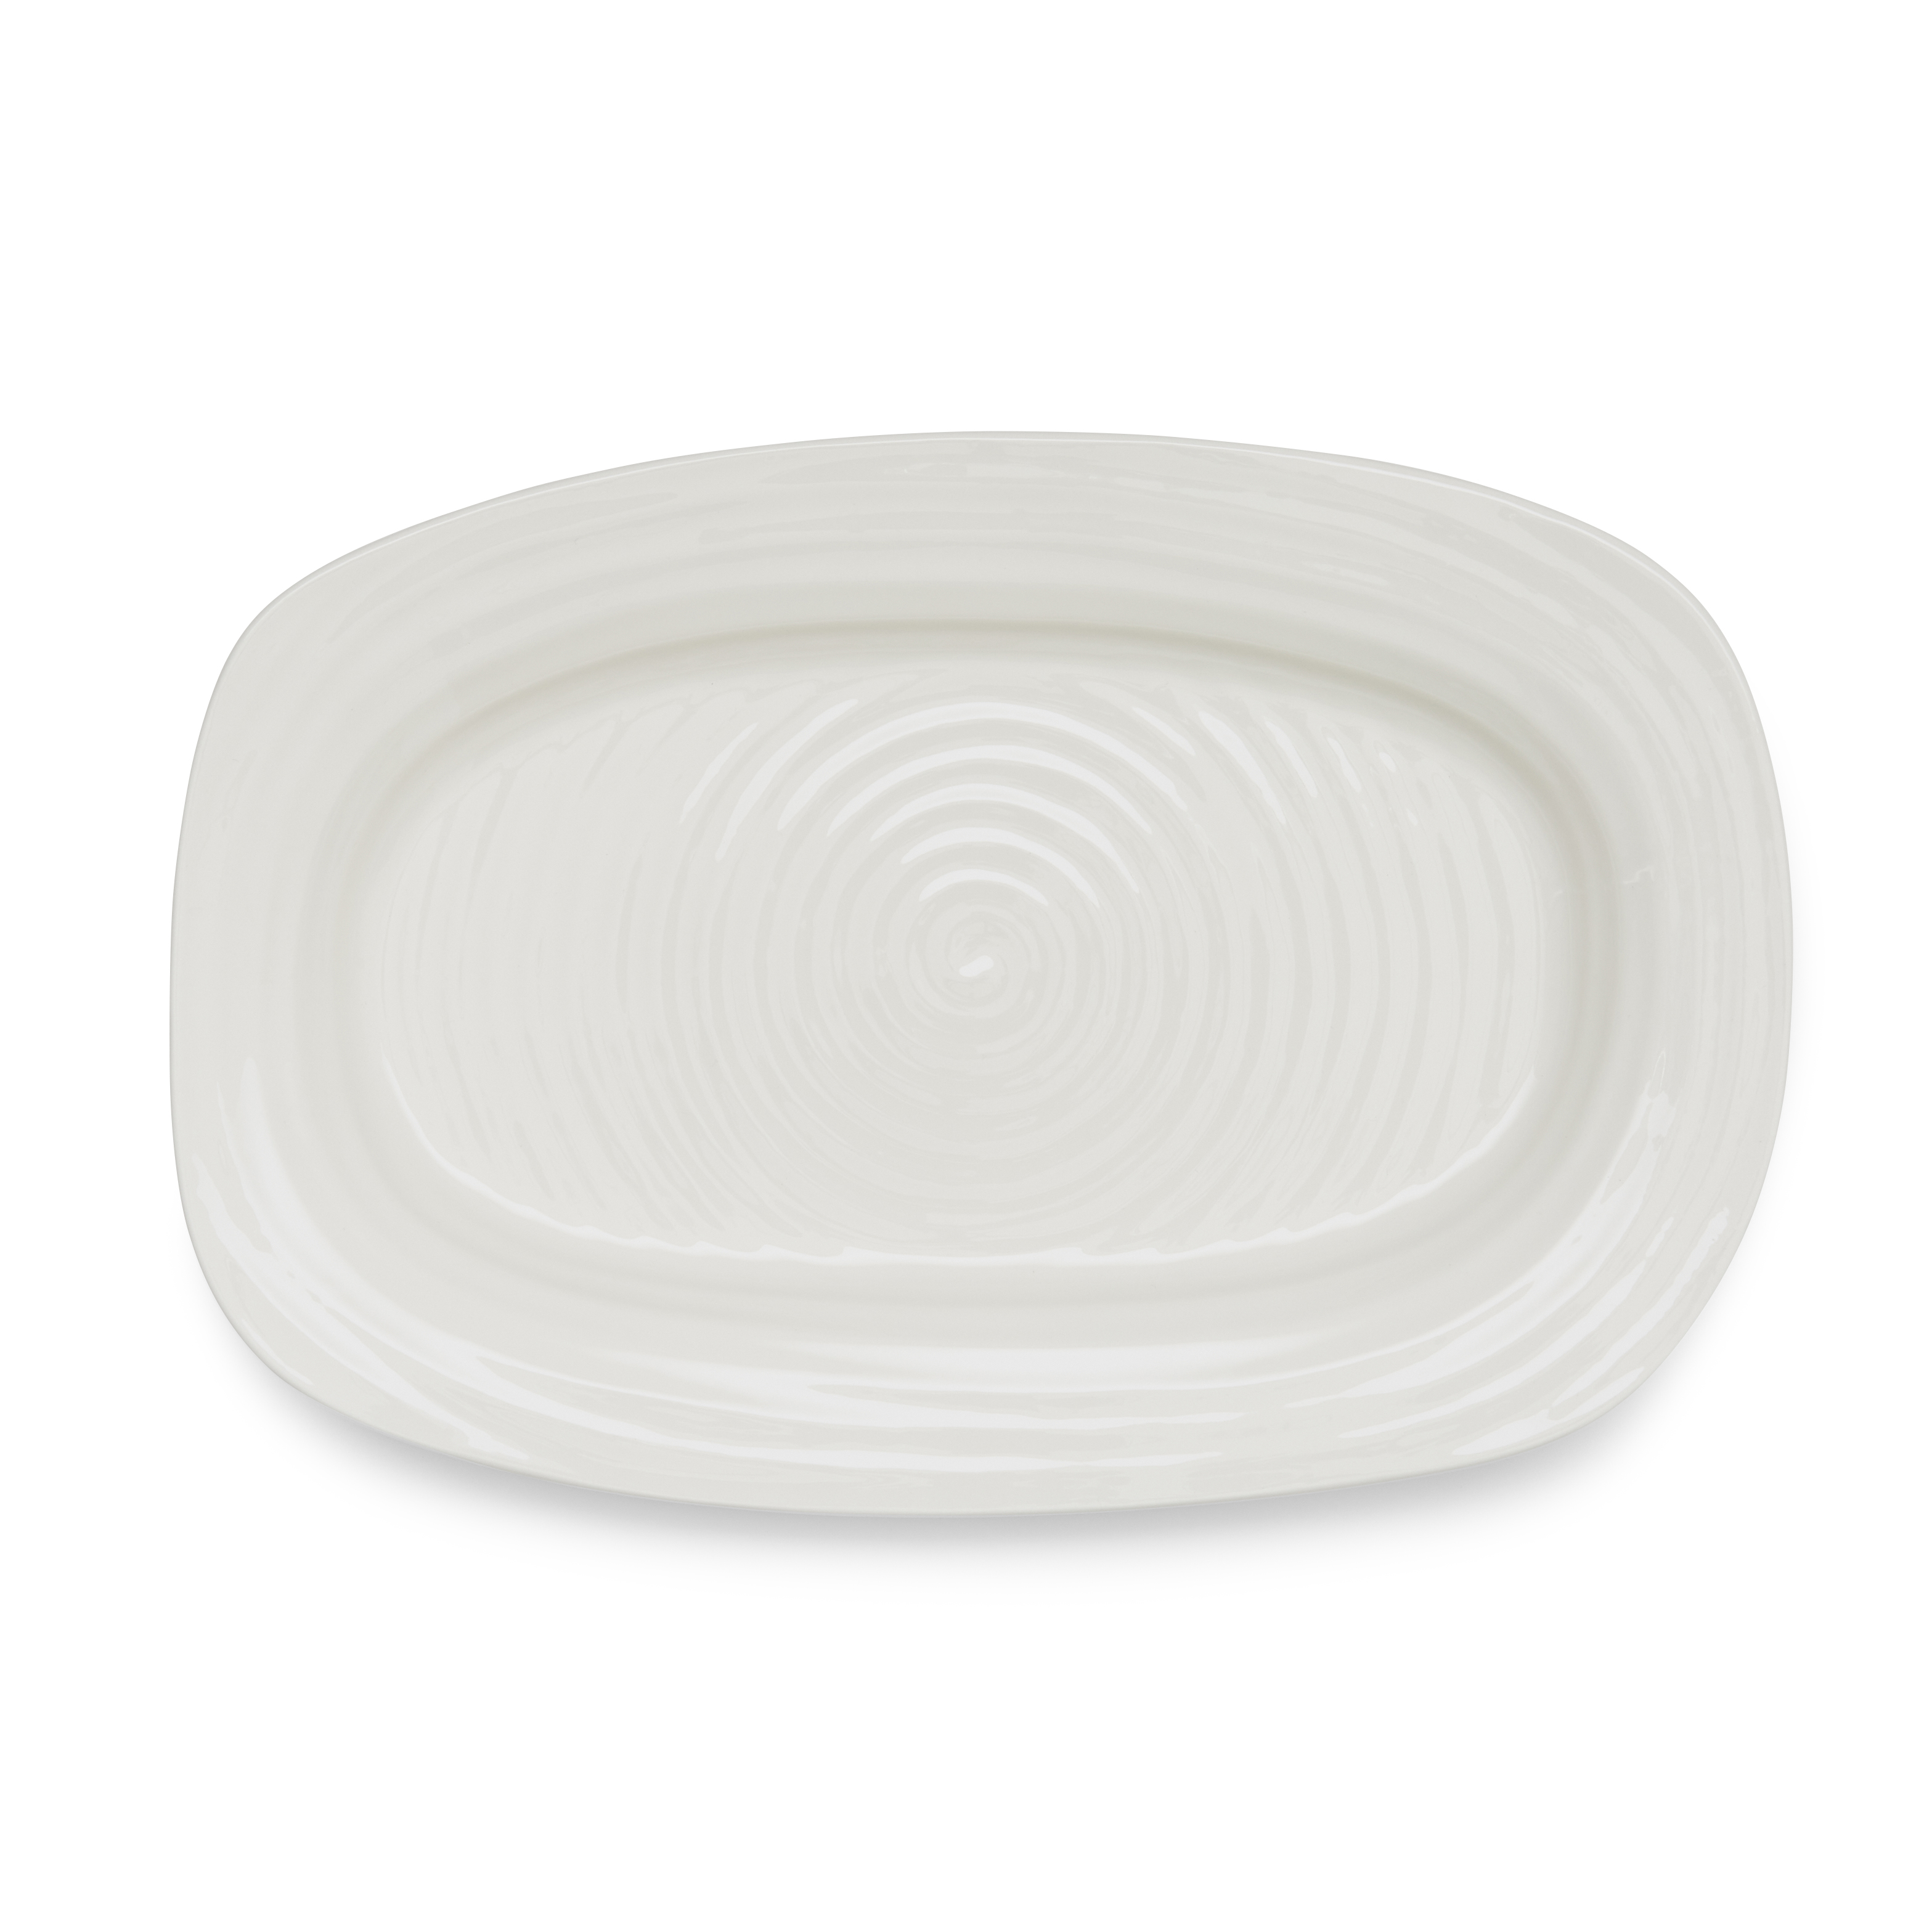 Sophie Conran for White Sandwich Tray image number null